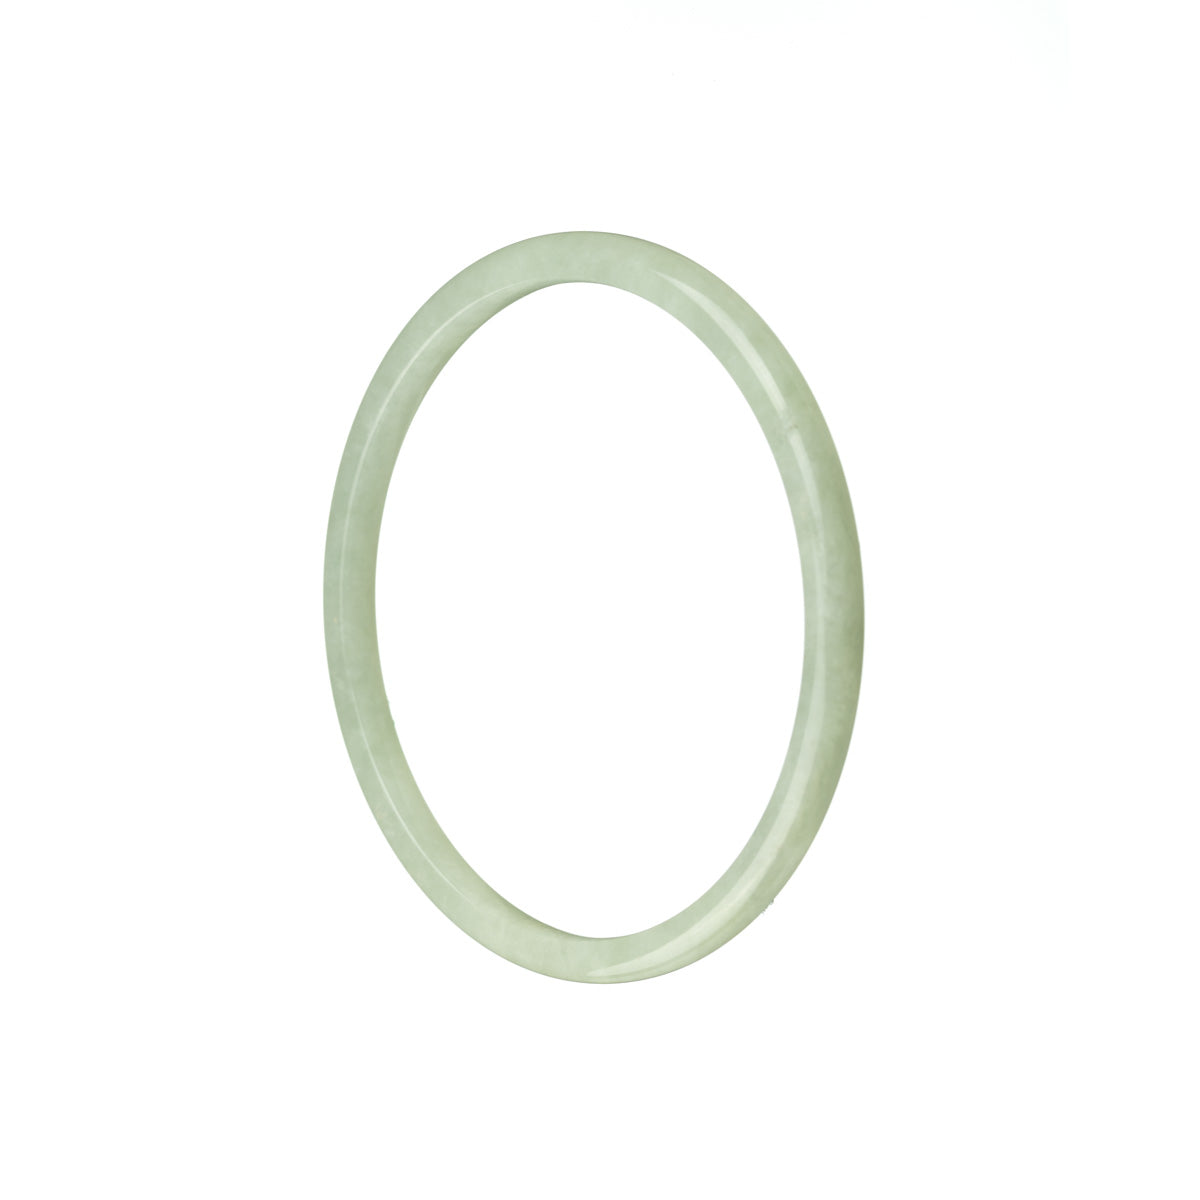 A close-up image of a pale green jade bangle bracelet, handcrafted with traditional design, displaying its natural and authentic beauty. The bracelet is thin and measures 52mm in diameter, making it a delicate and elegant accessory. Manufactured by MAYS™.